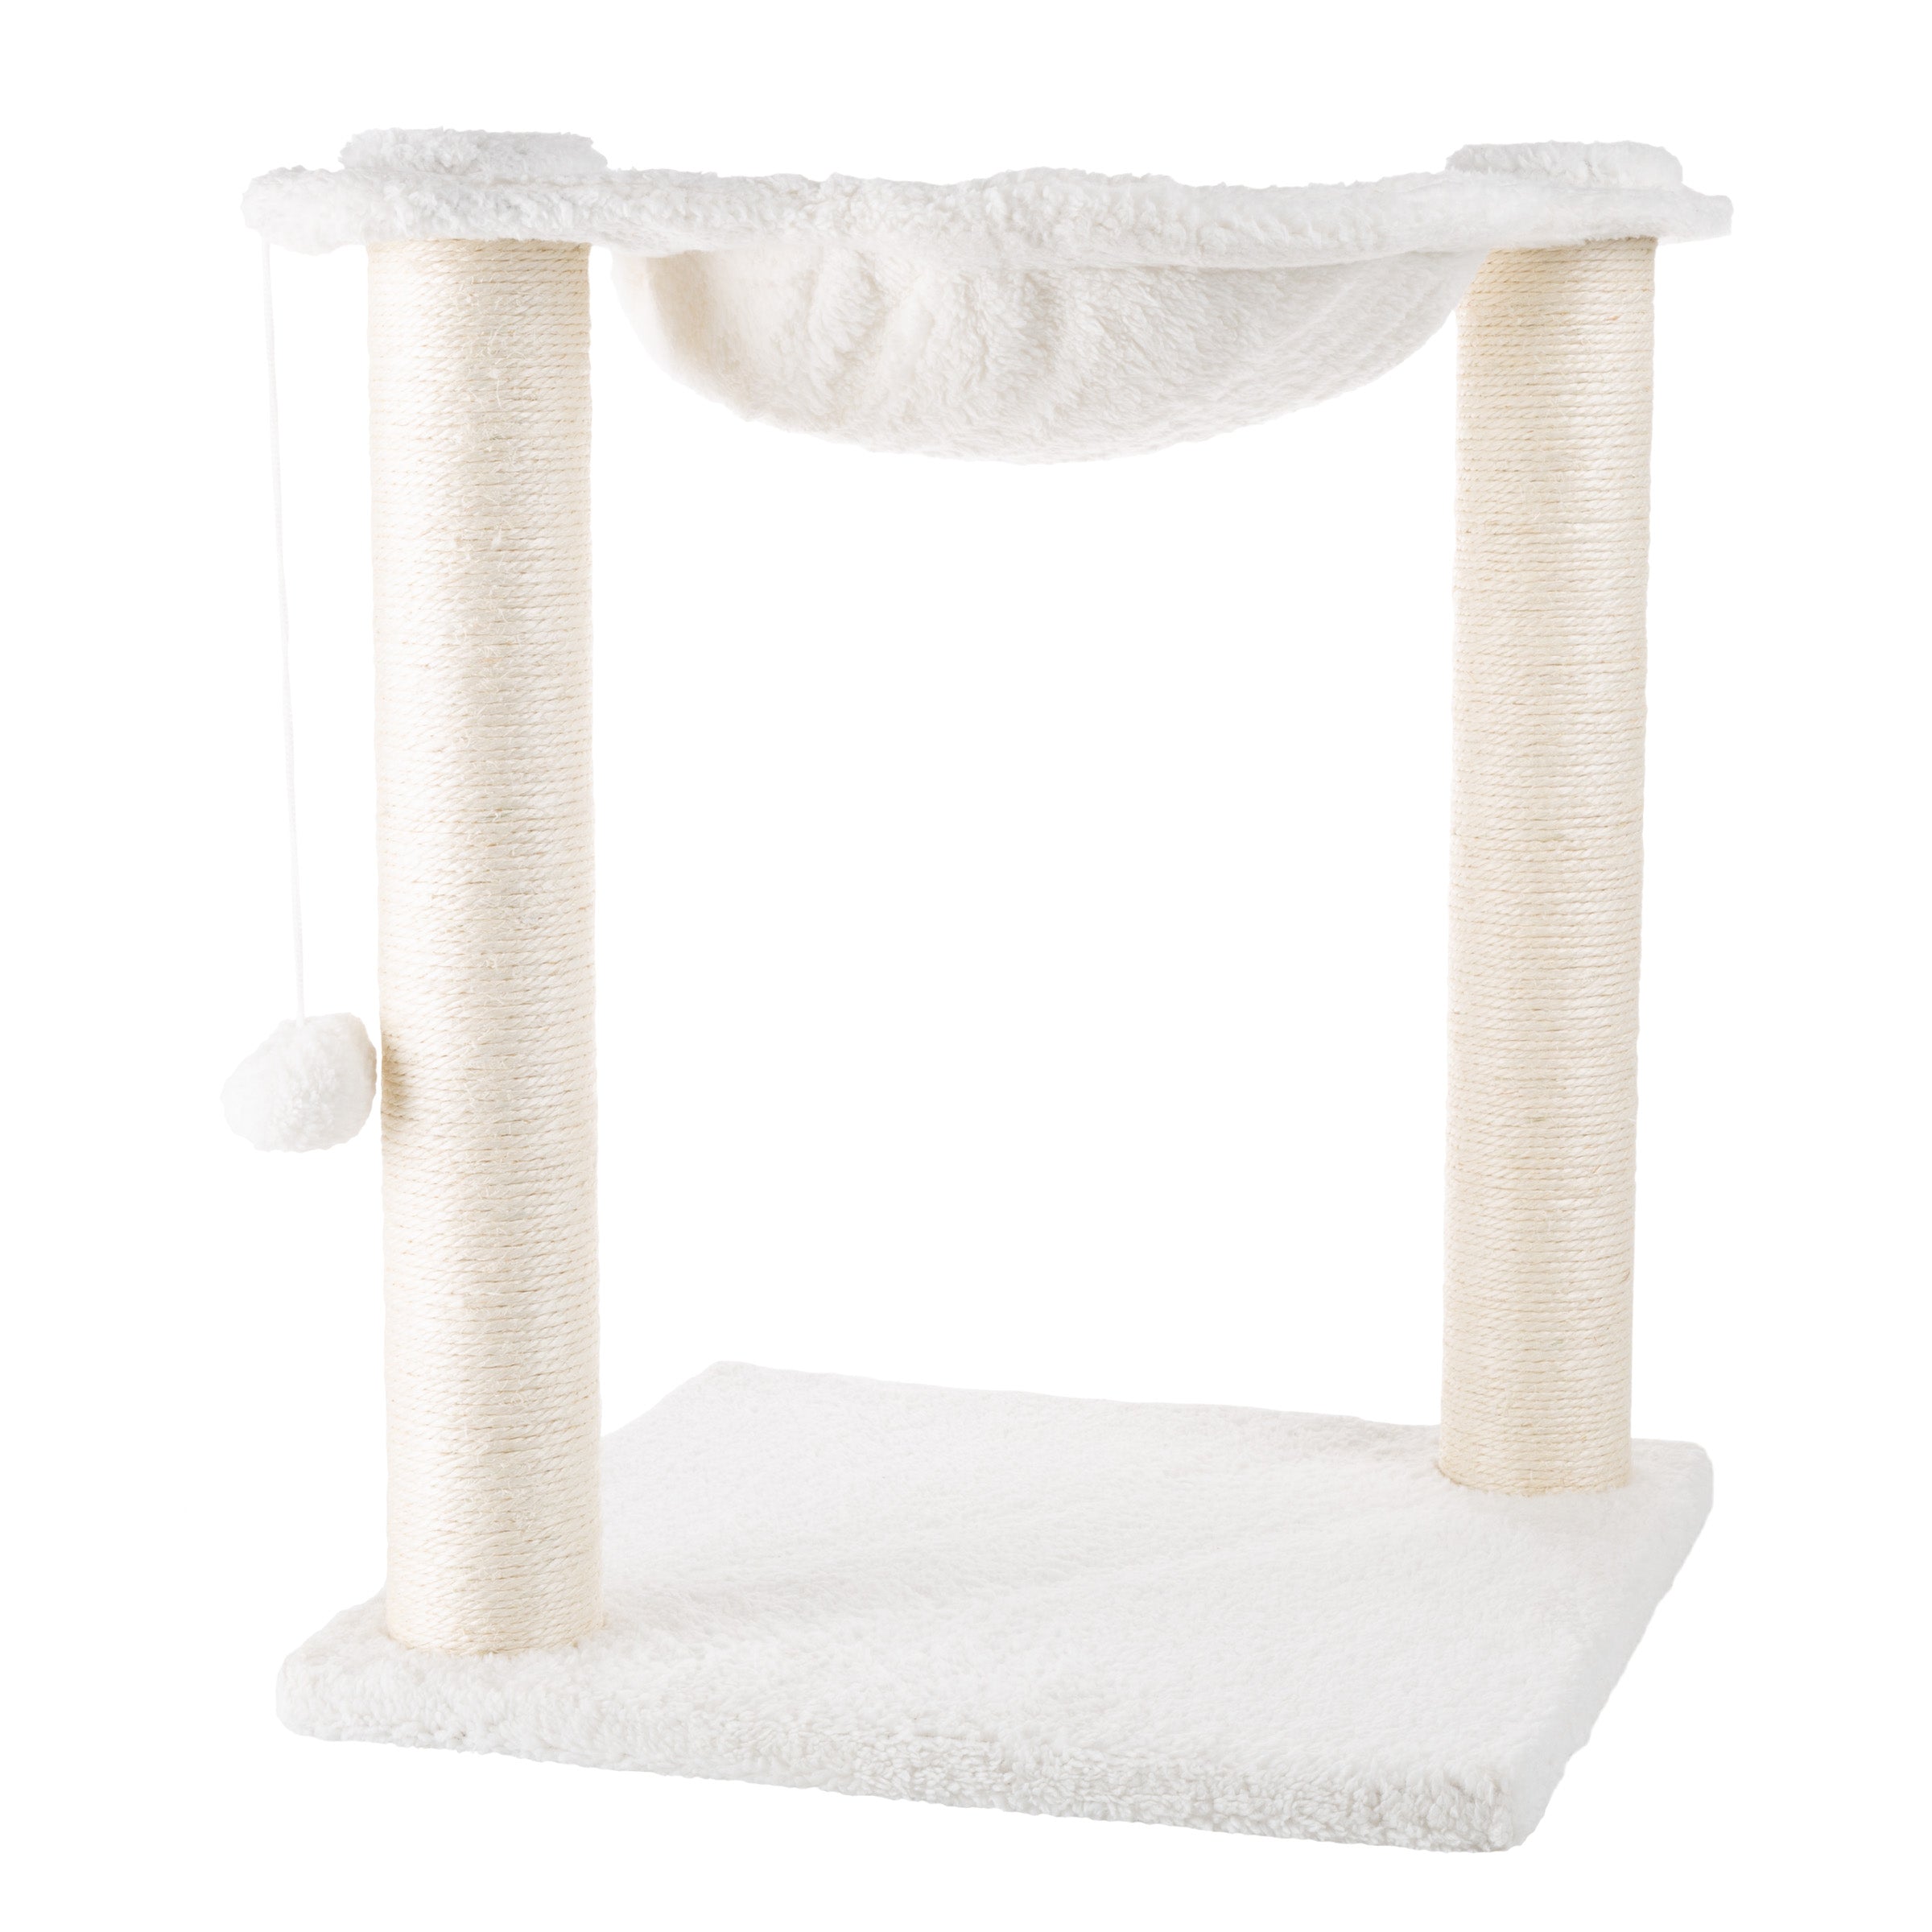 19-Inch Cat Scratching Post with Hammock – Sisal Fabric and Carpet Small Cat Tree， Hanging Ball Toy for Adult Cats and Kittens by PETMAKER (White)